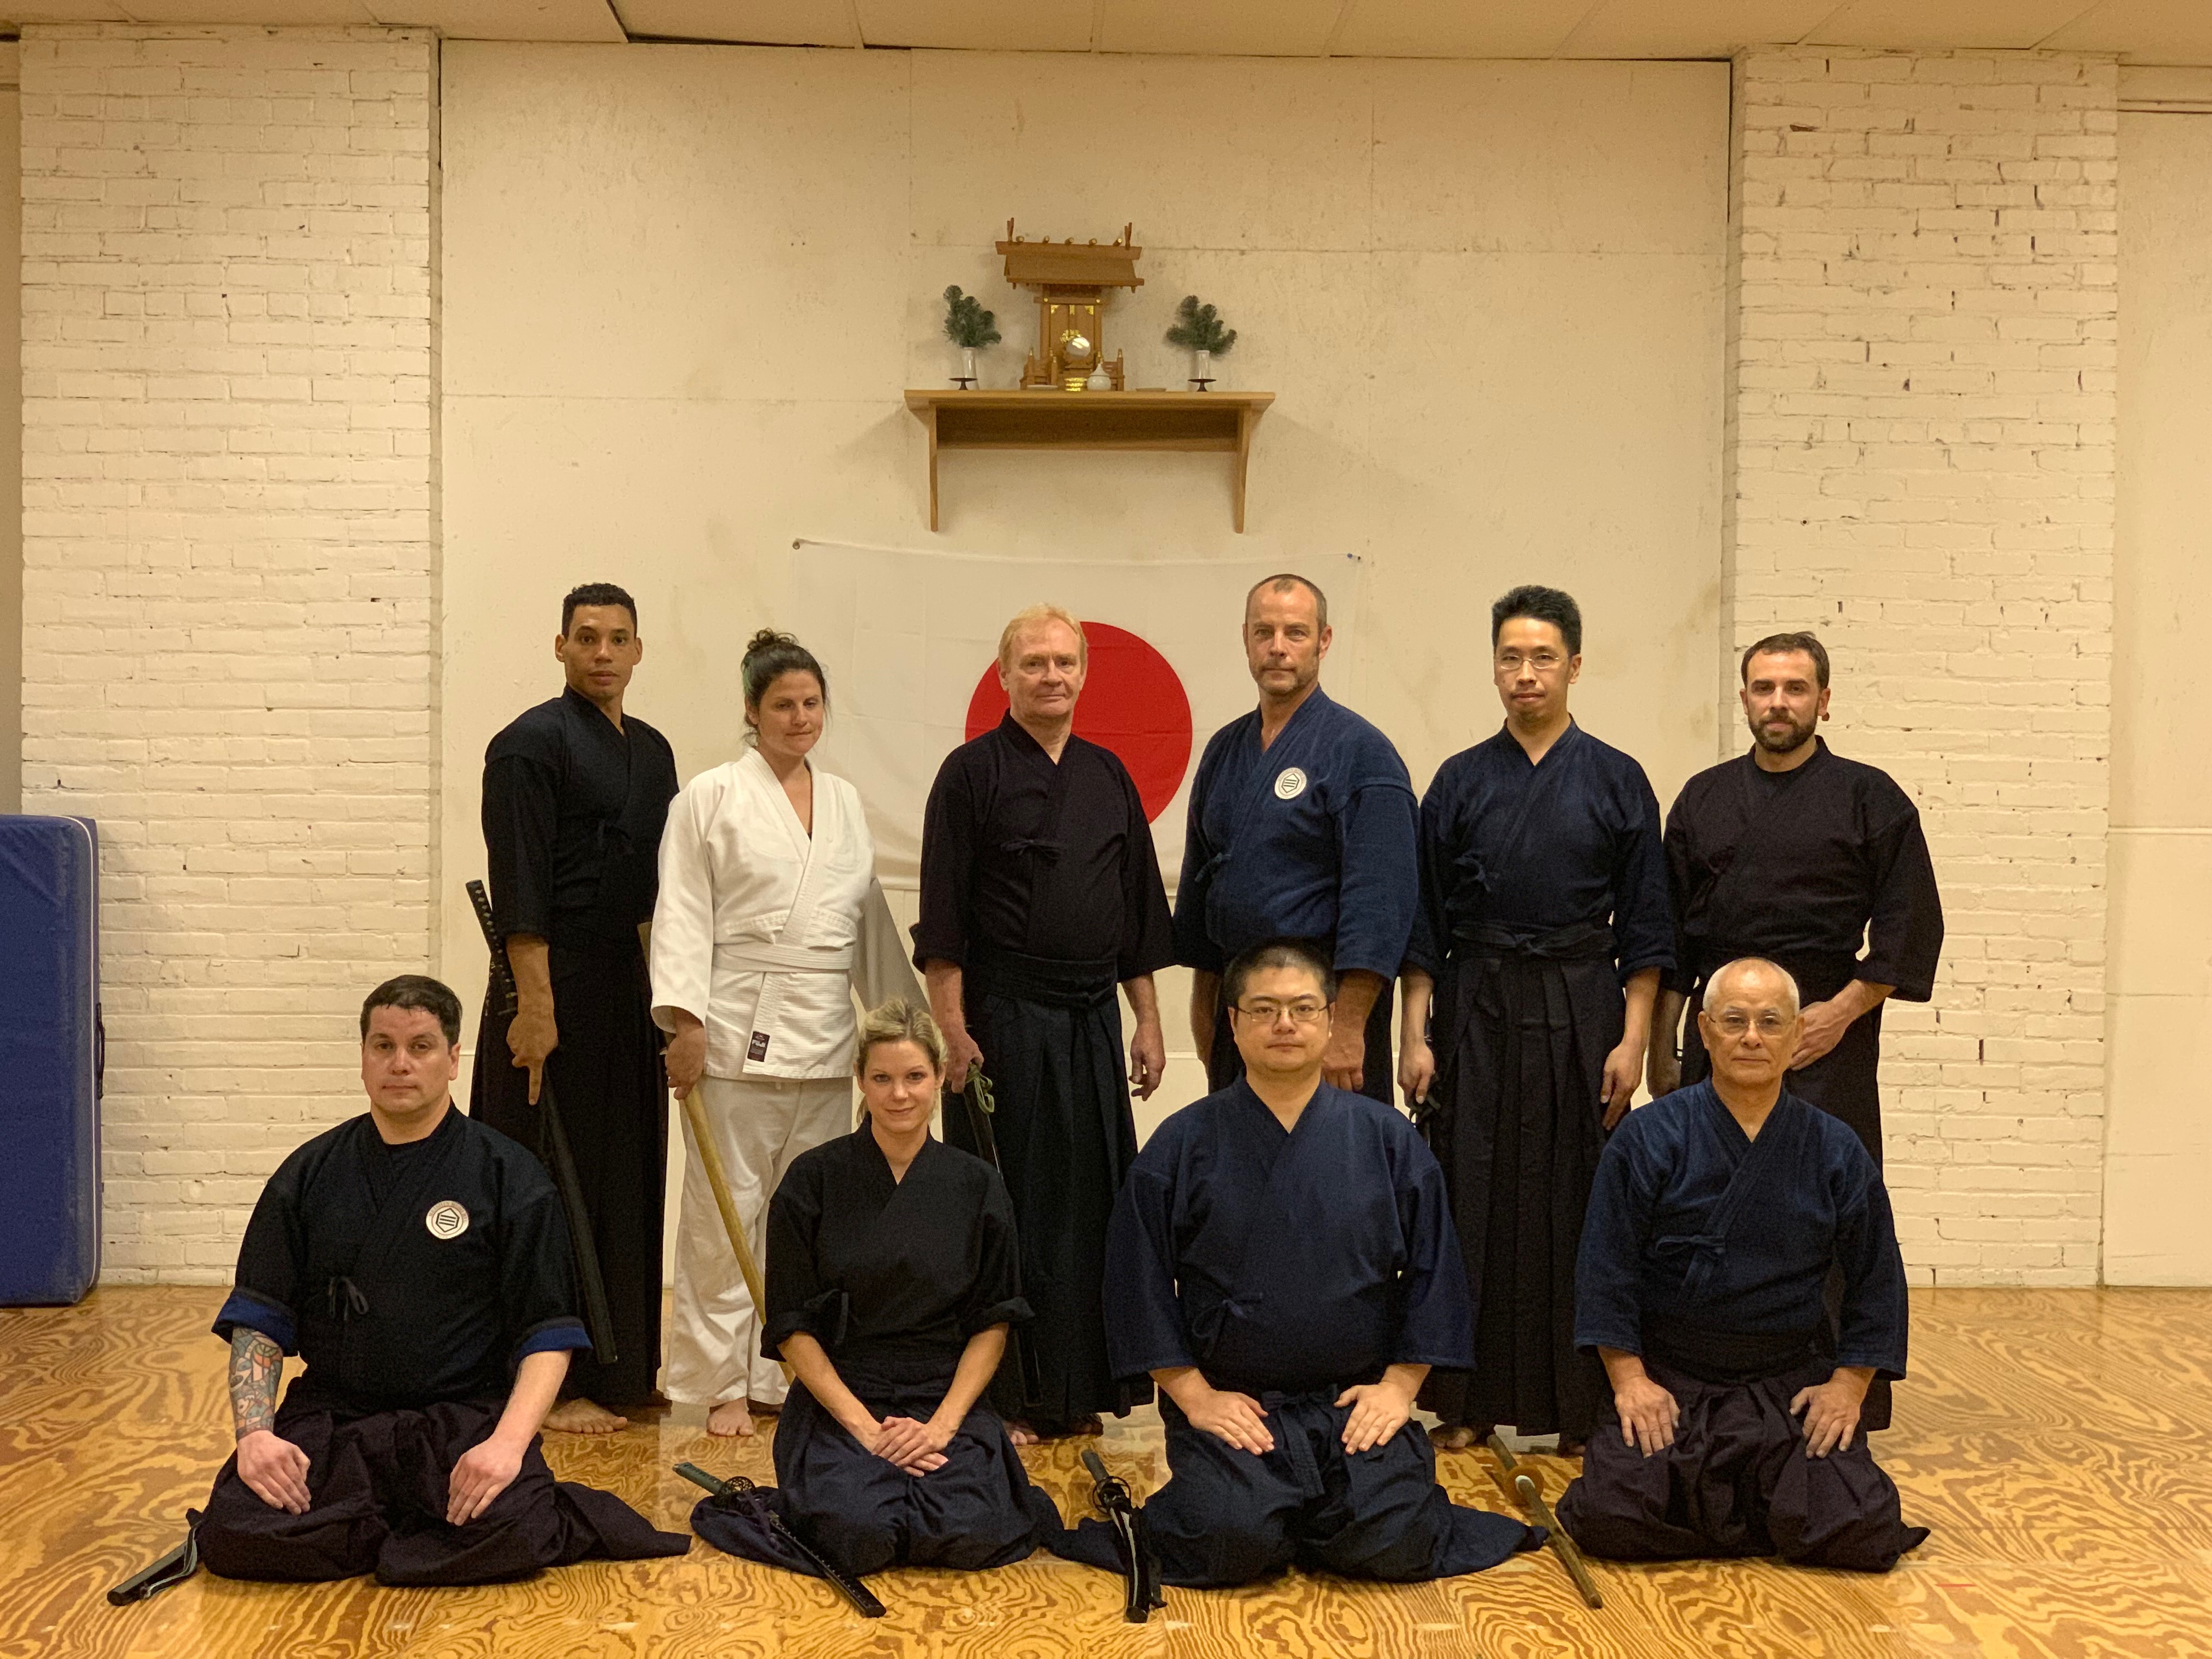 Group photo from first day of 2019 Meishin Muso Ryu iaido seminar, Sept. 14, 2019. (Credit: Michael Luckenbill)